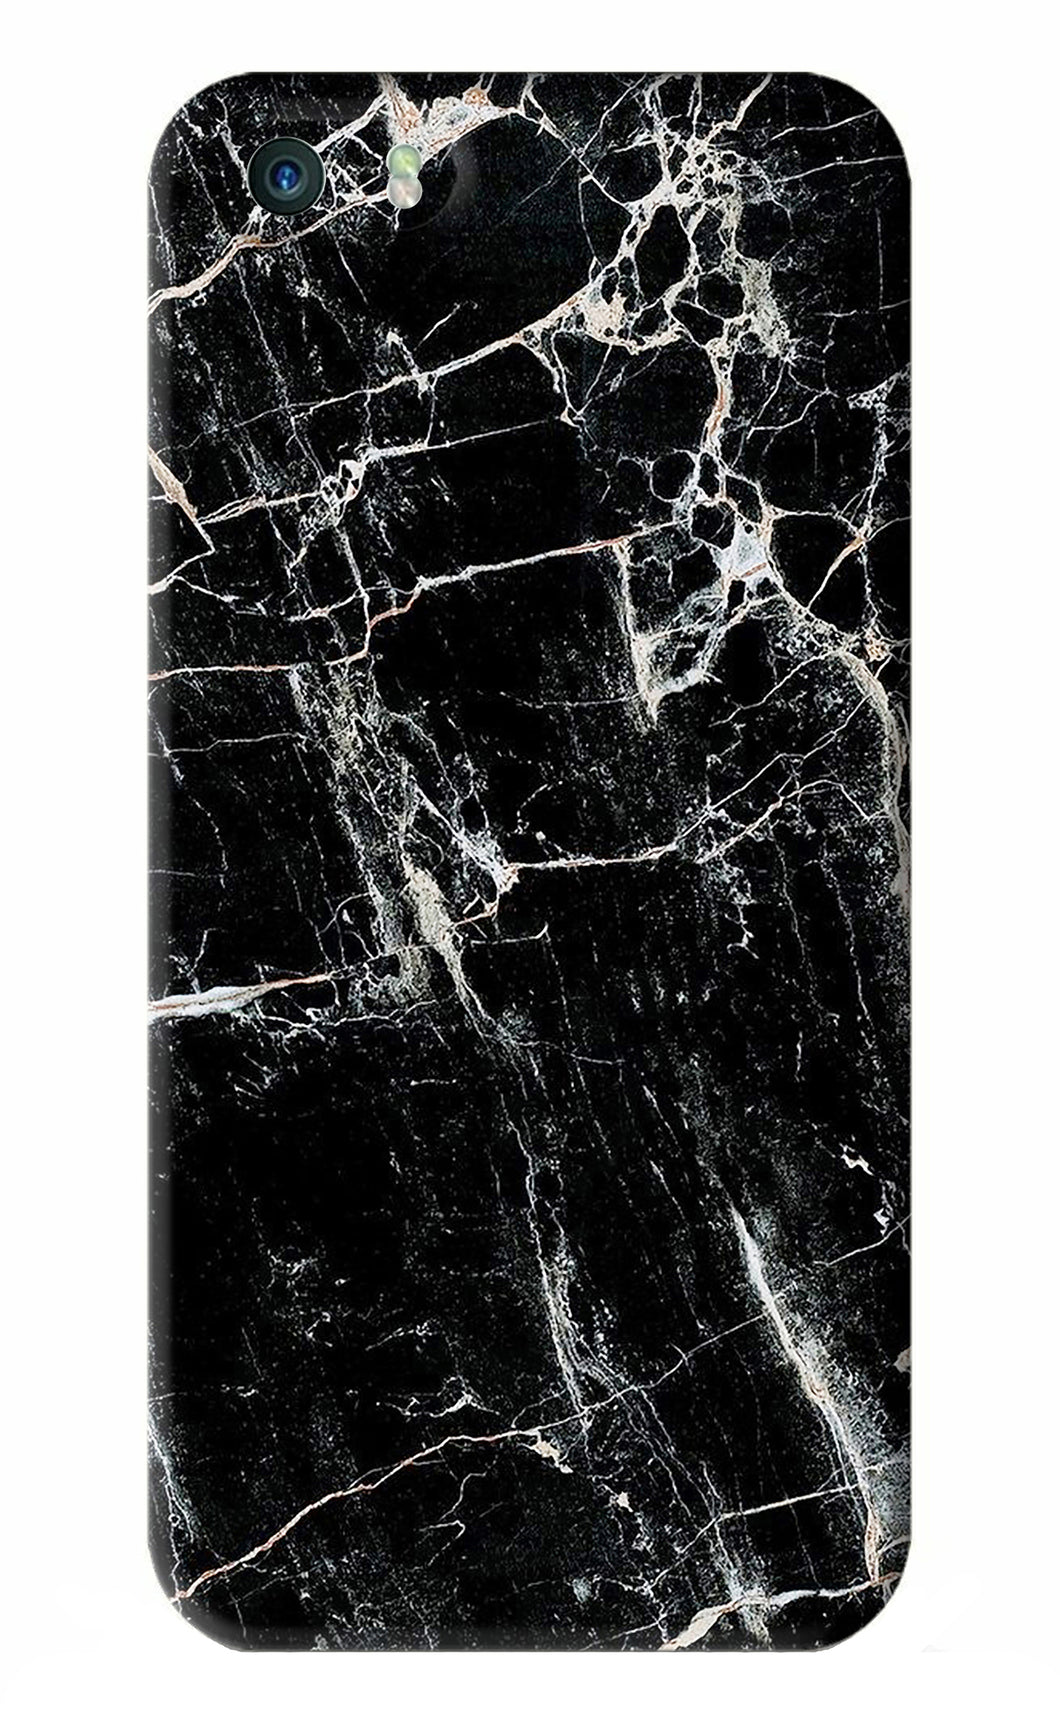 Black Marble Texture 1 iPhone 5 Back Skin Wrap